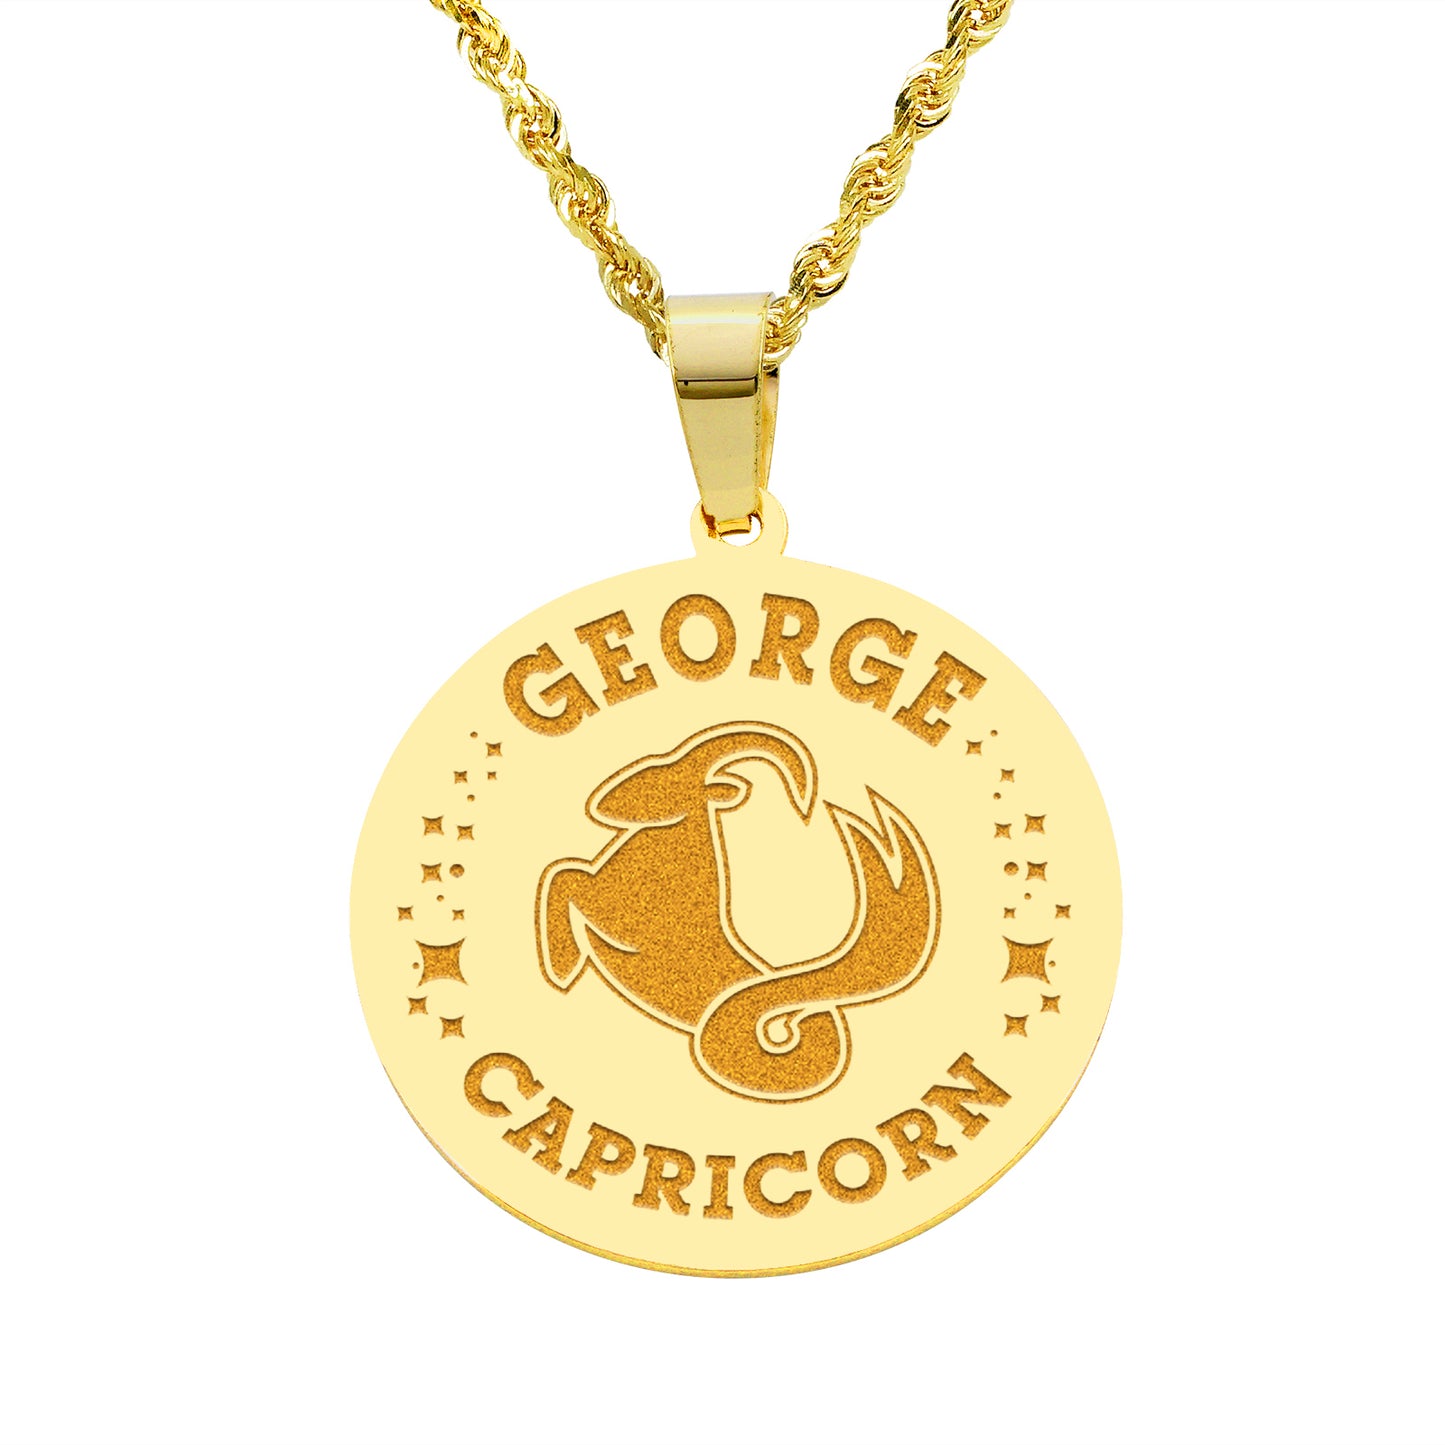 Zodiac Engraved Pendant with Customizable Name in High Polished 14K Gold | 0.75" Capricorn